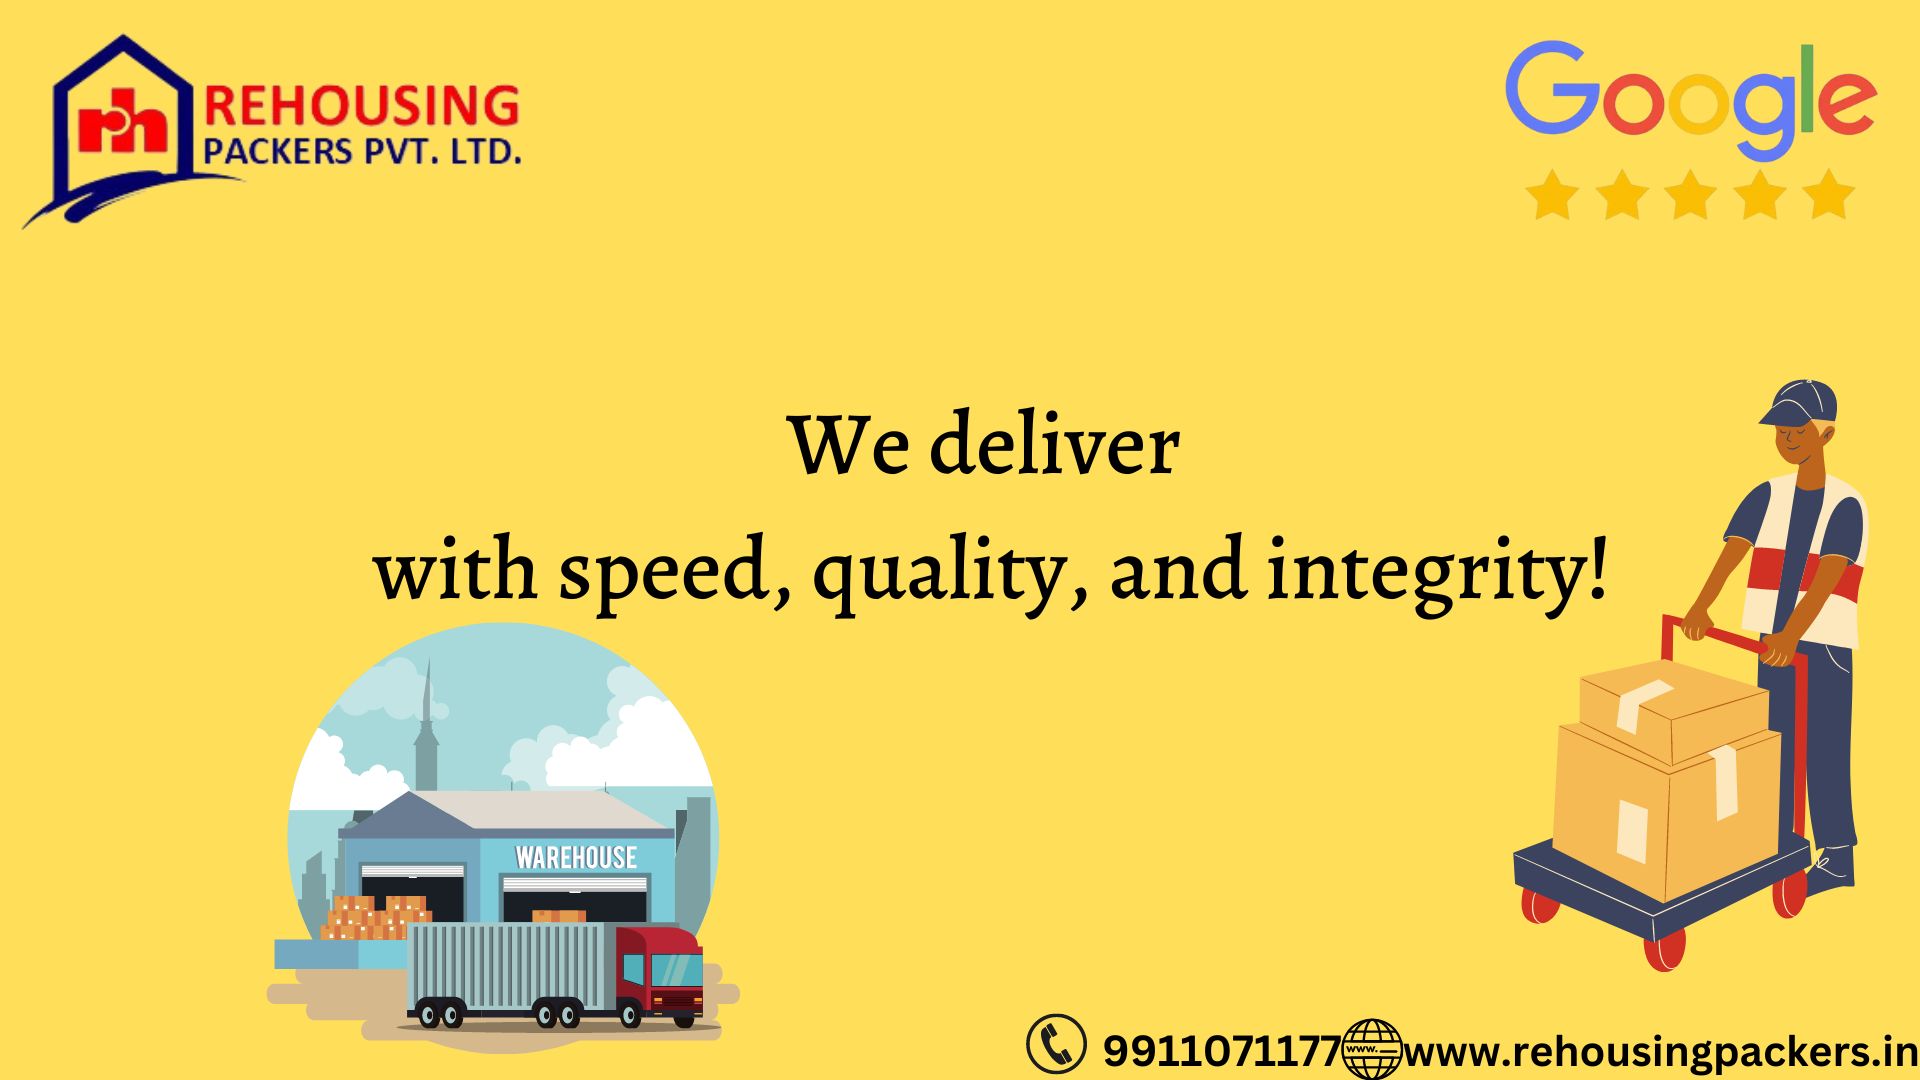 our courier services from Gurgaon to Noida